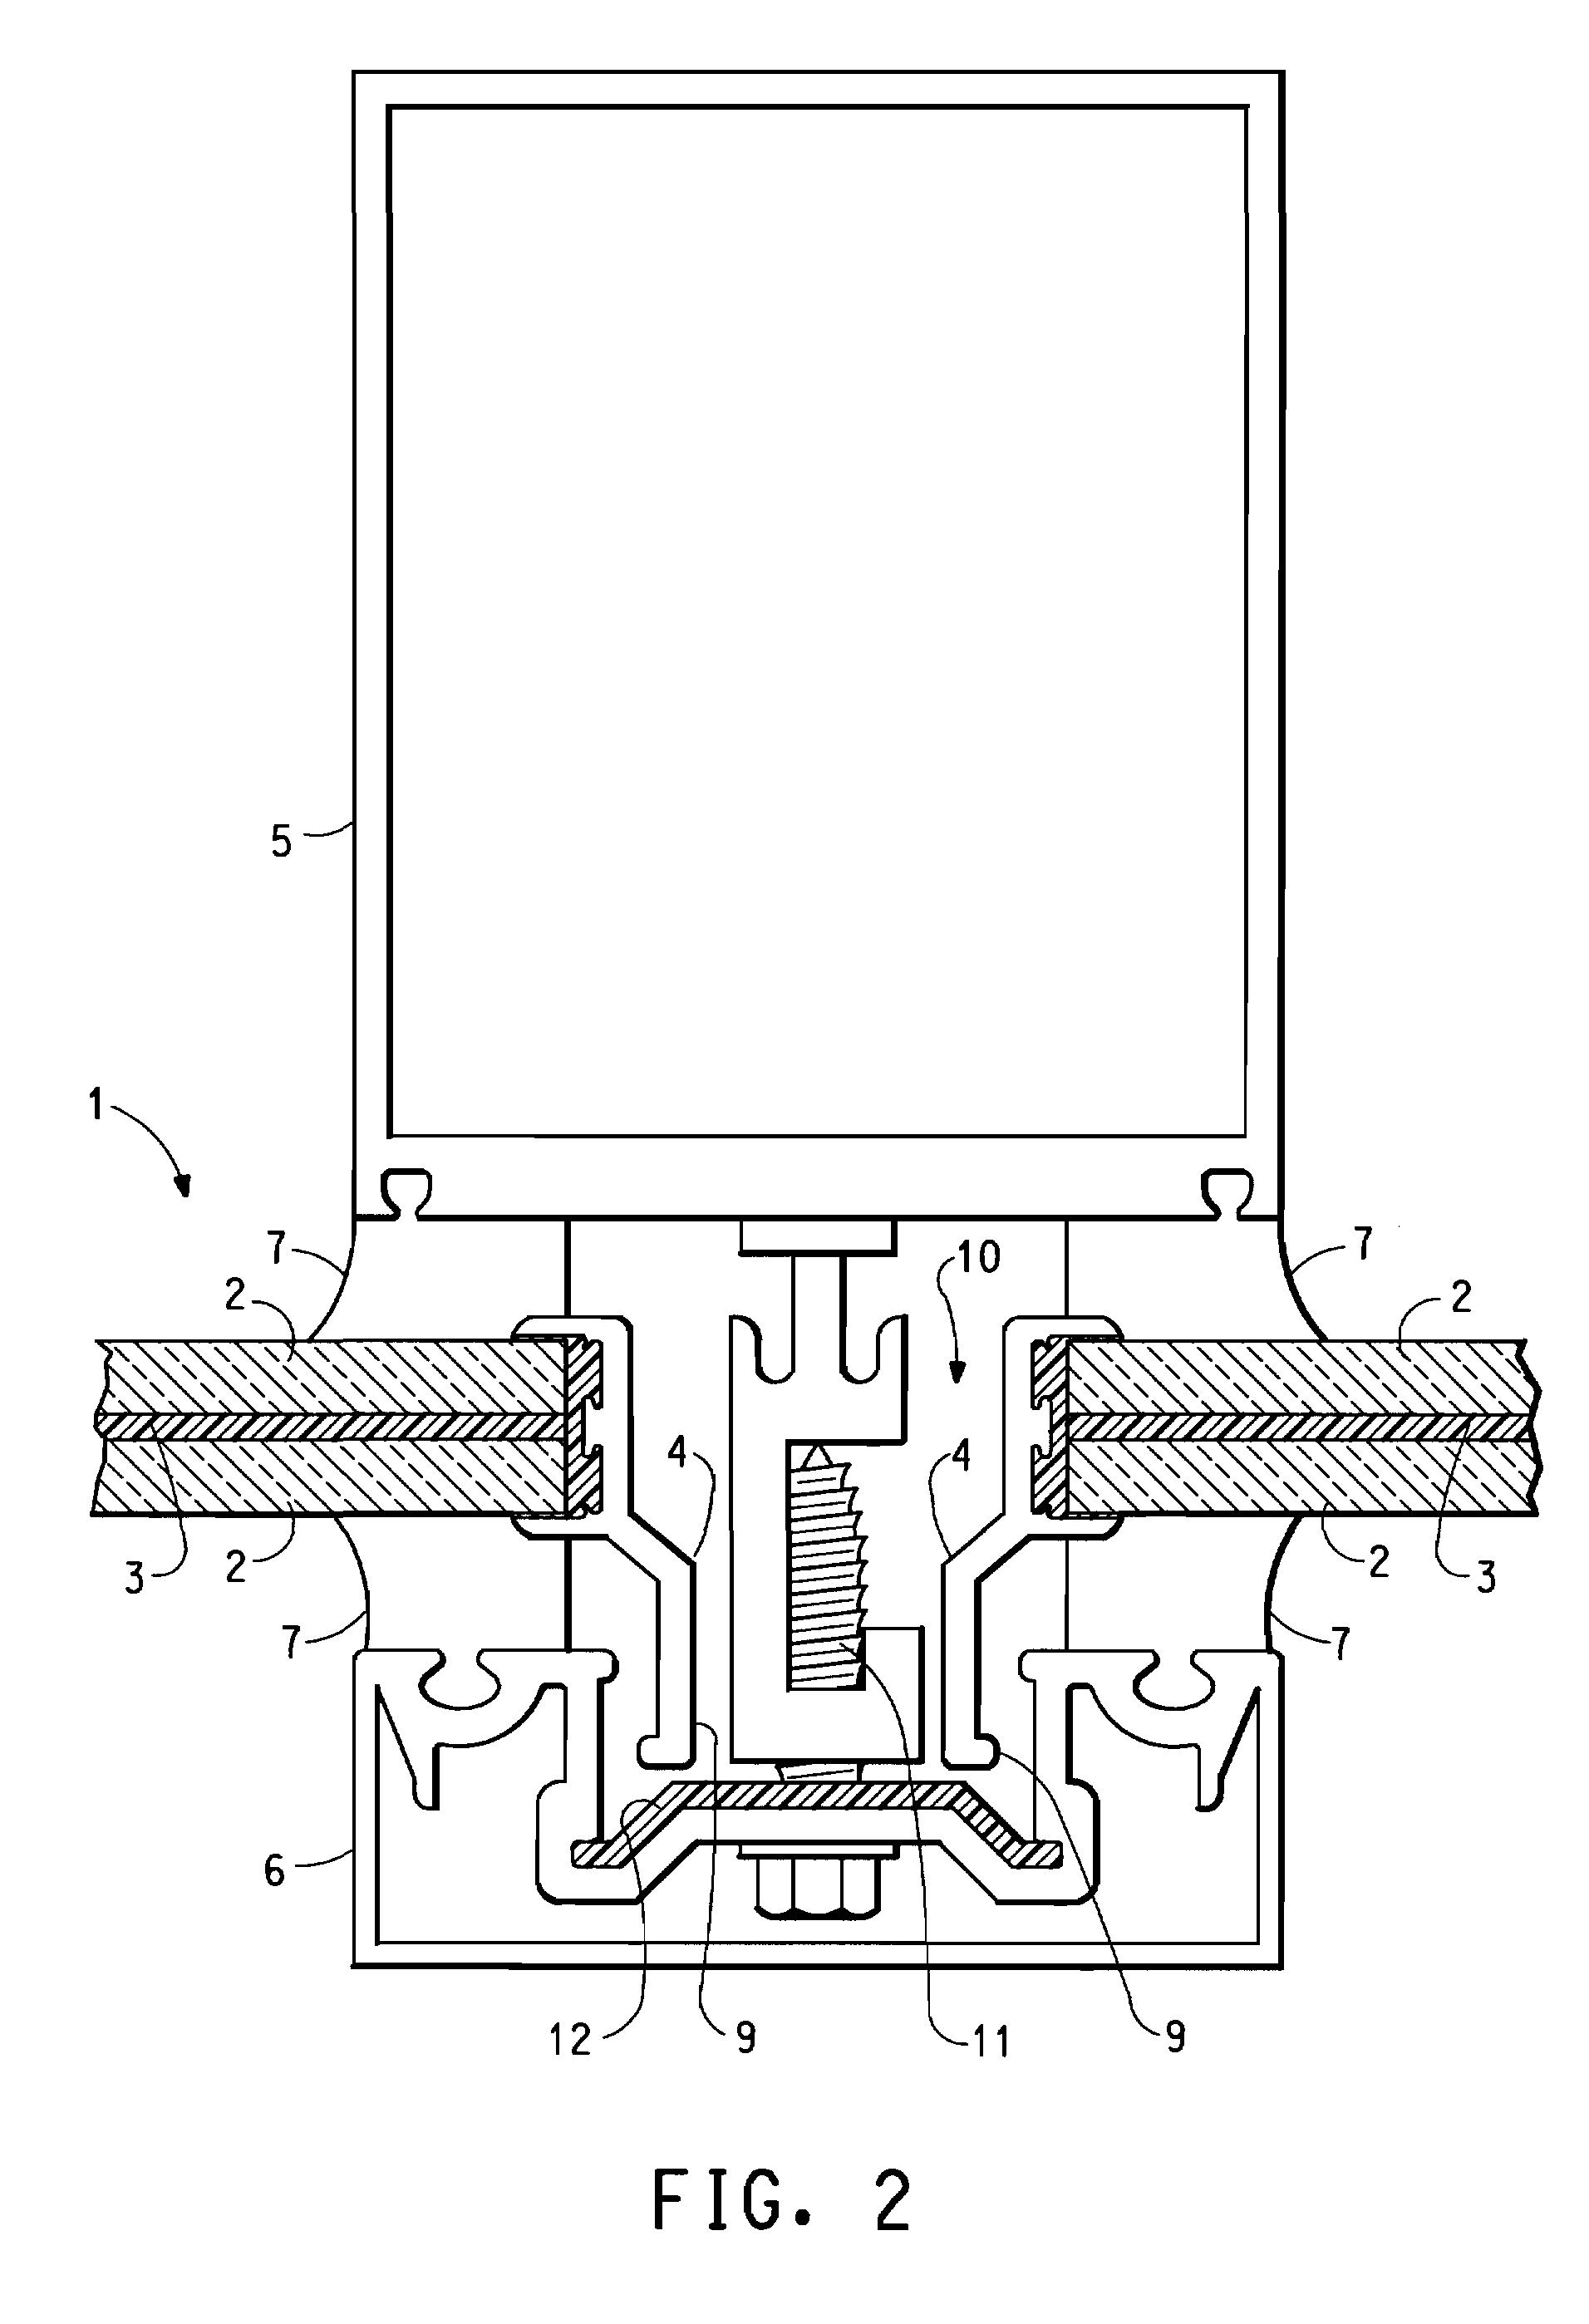 Process for attaching an external pressure plate glazing element to a support structure